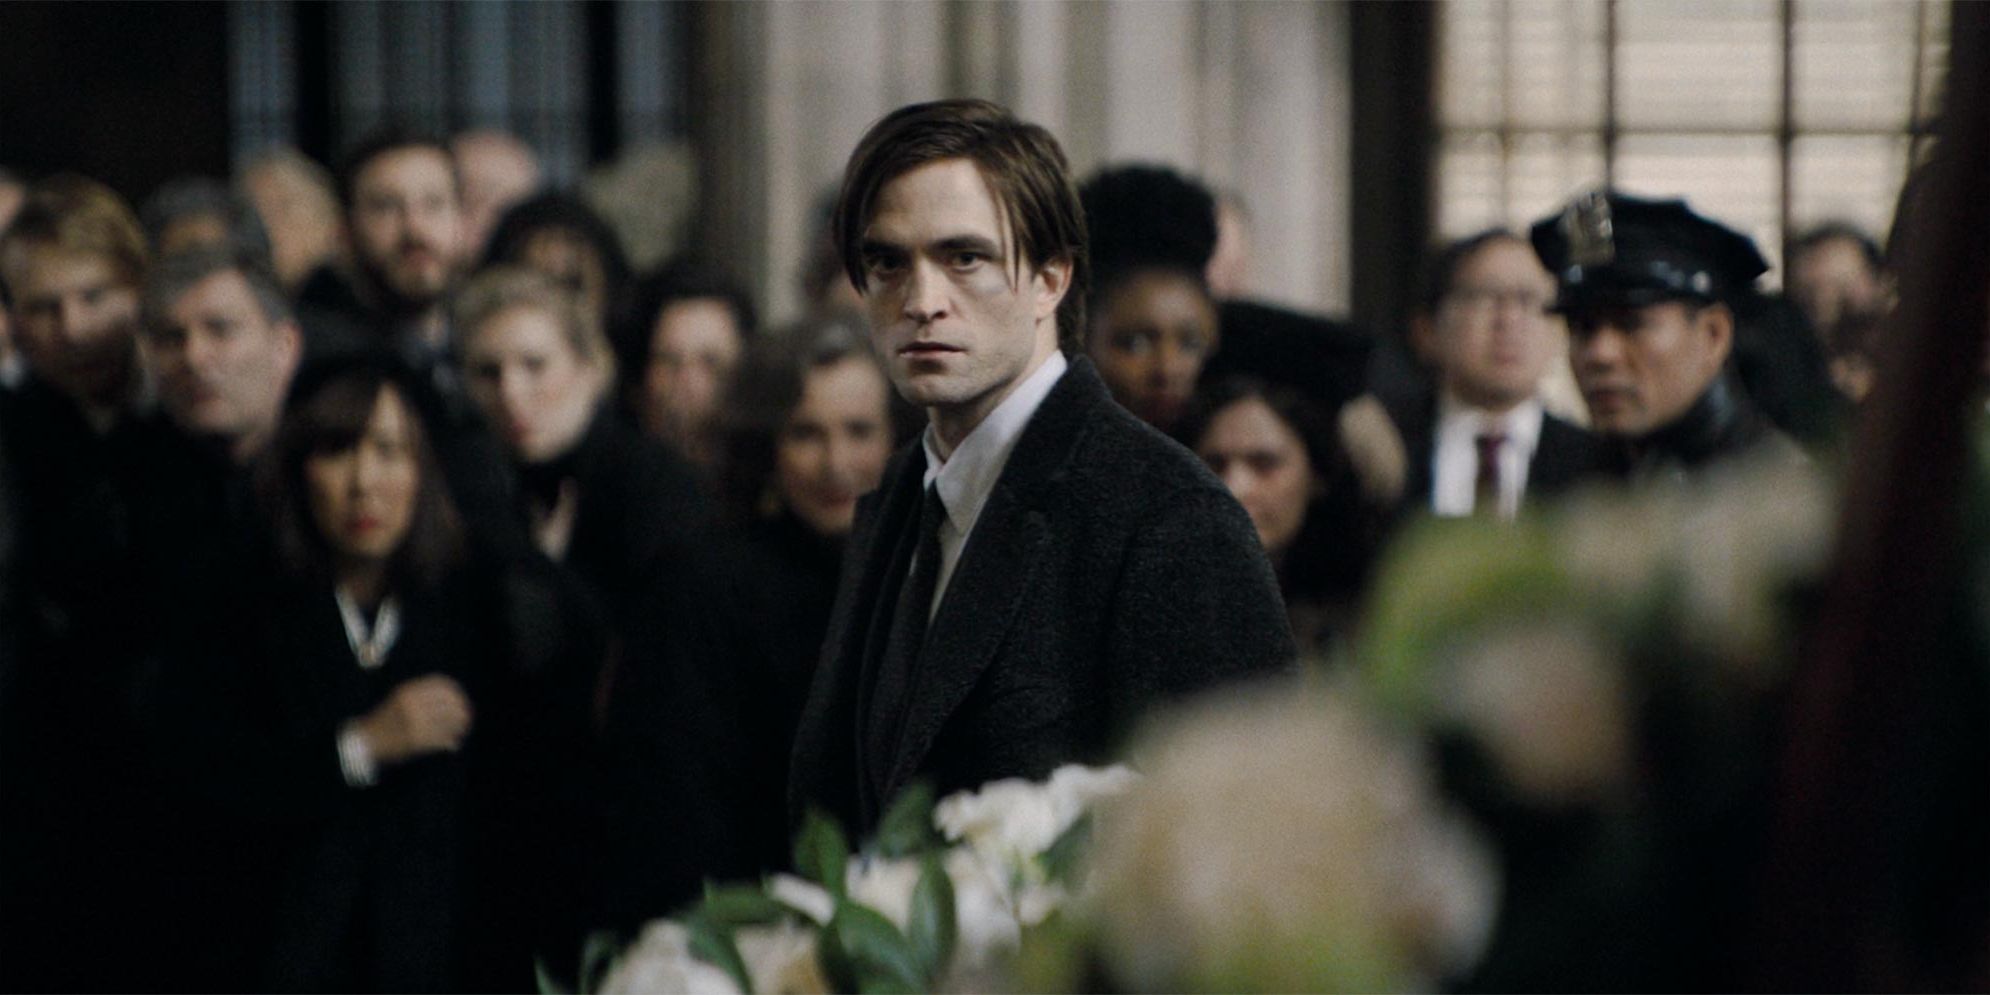 Bruce Wayne at a funeral, staring intensely into the distance in The Batman.